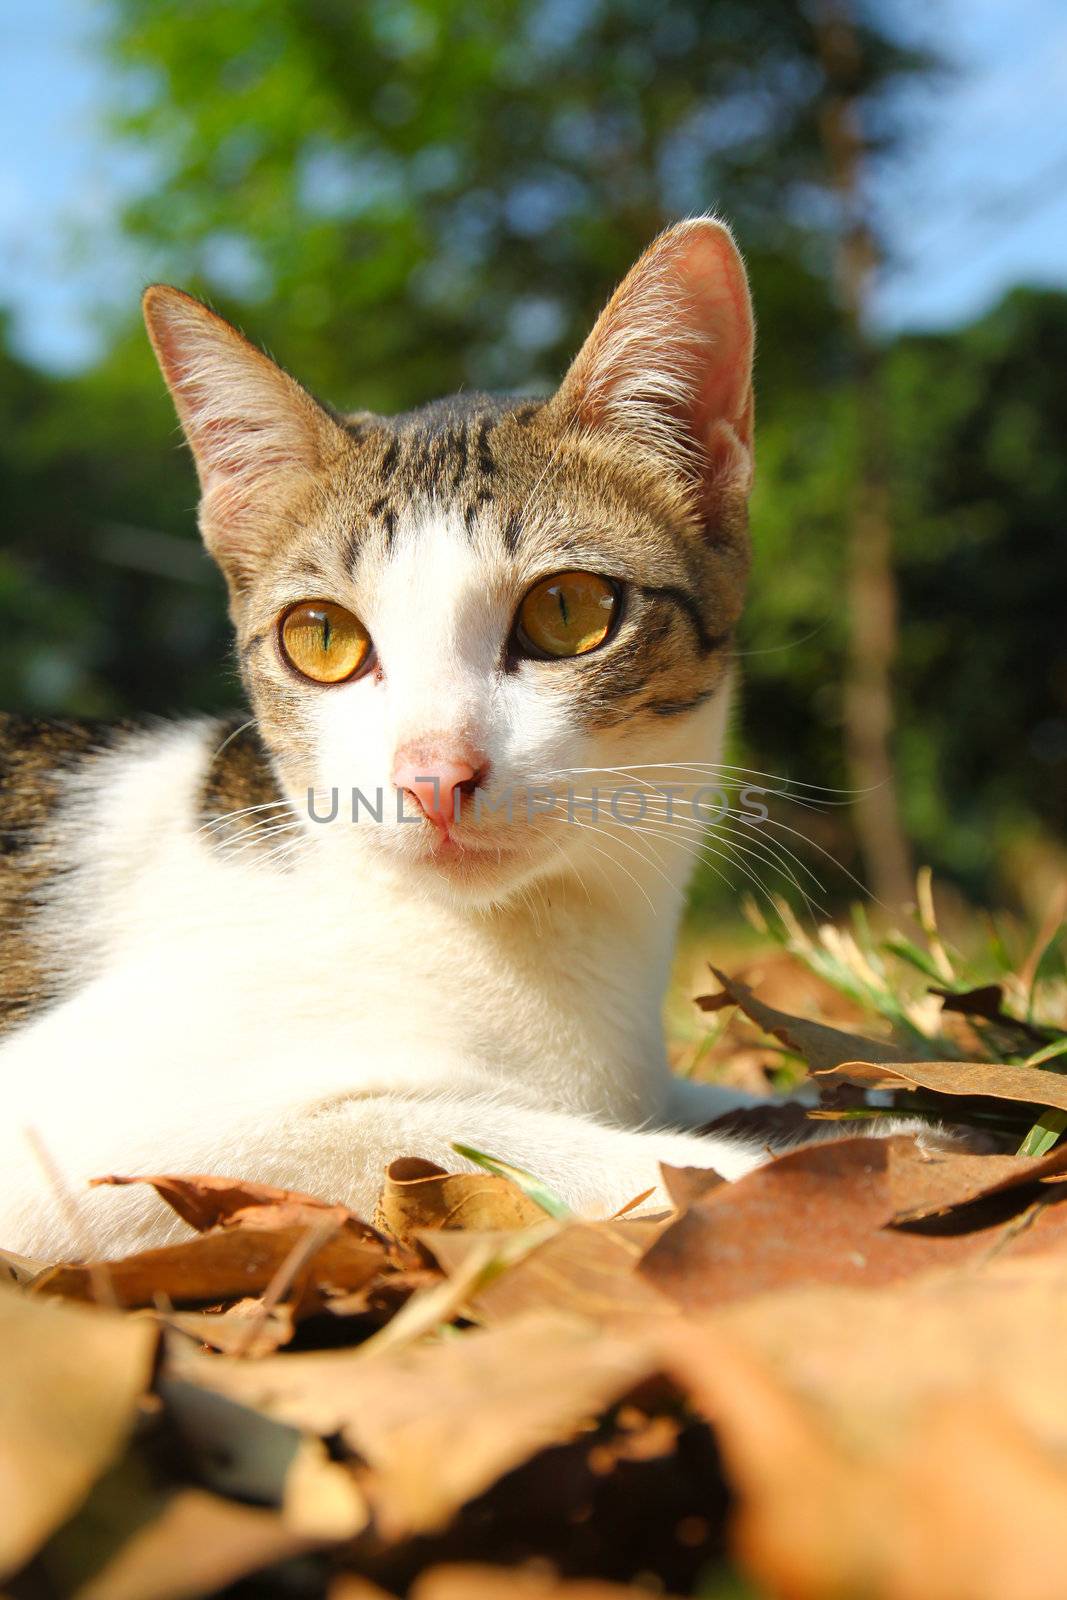 a cute cat lying on grass in the garden by nuchylee